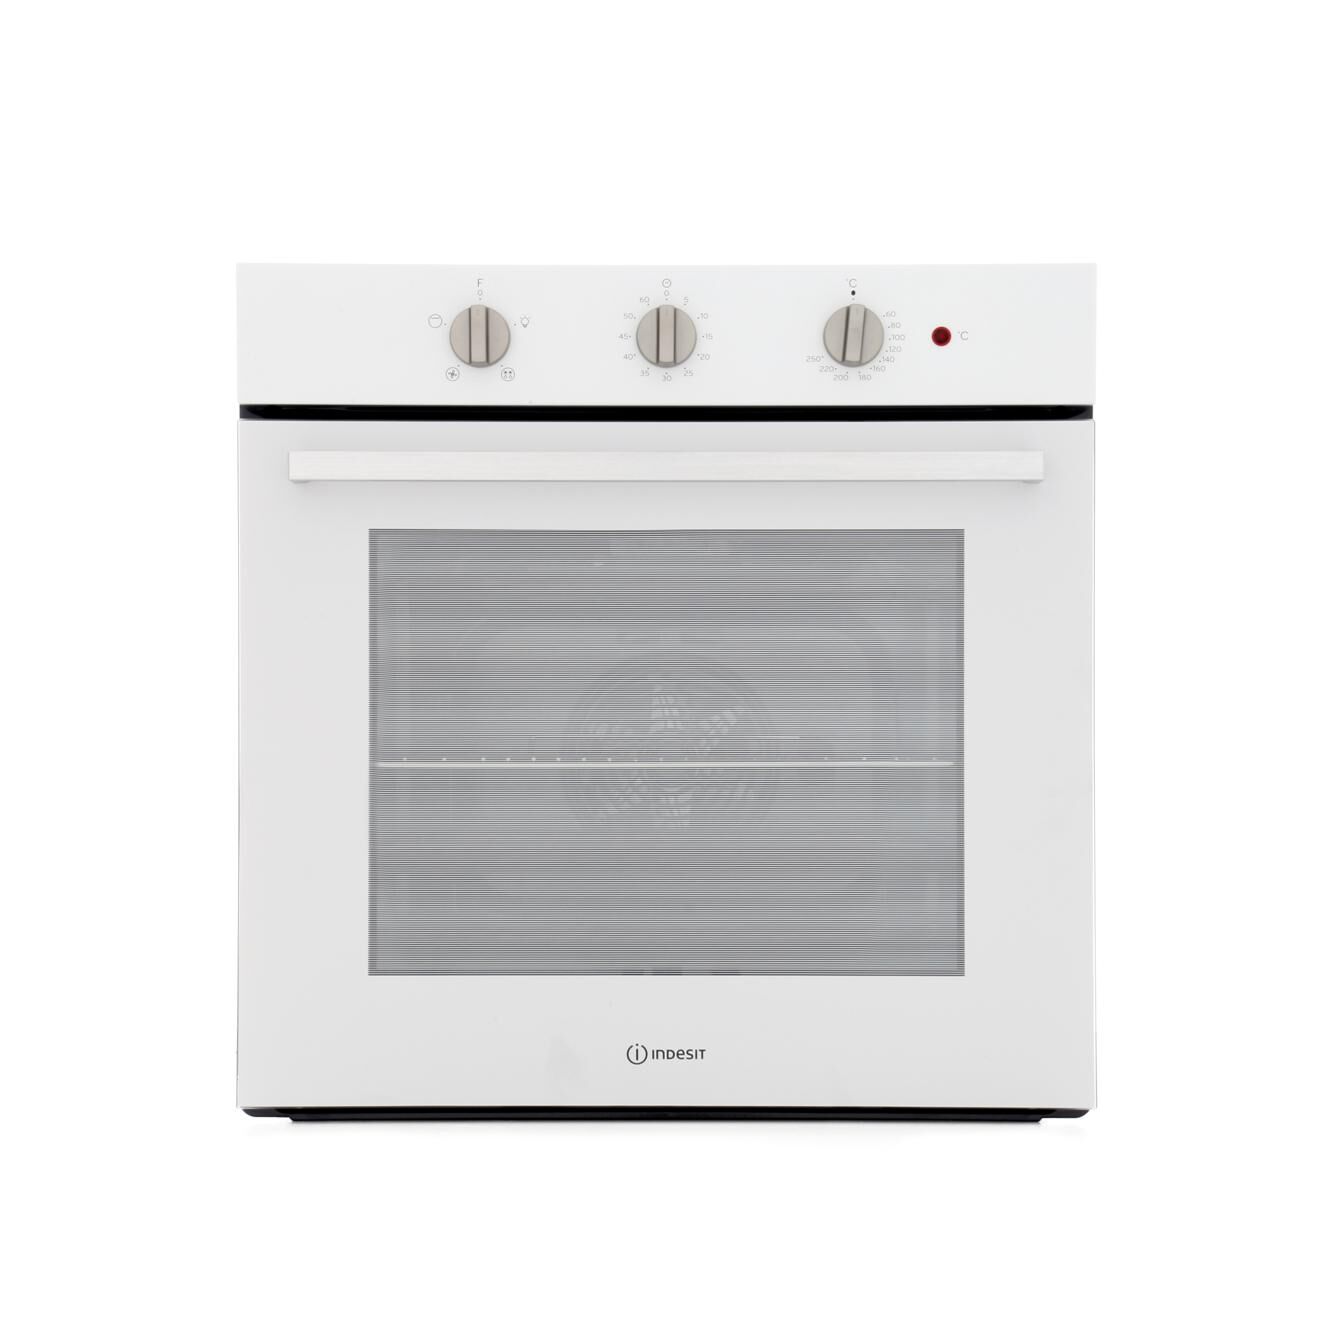 Indesit IFW 6330 WH UK Single Built In Electric Oven - White